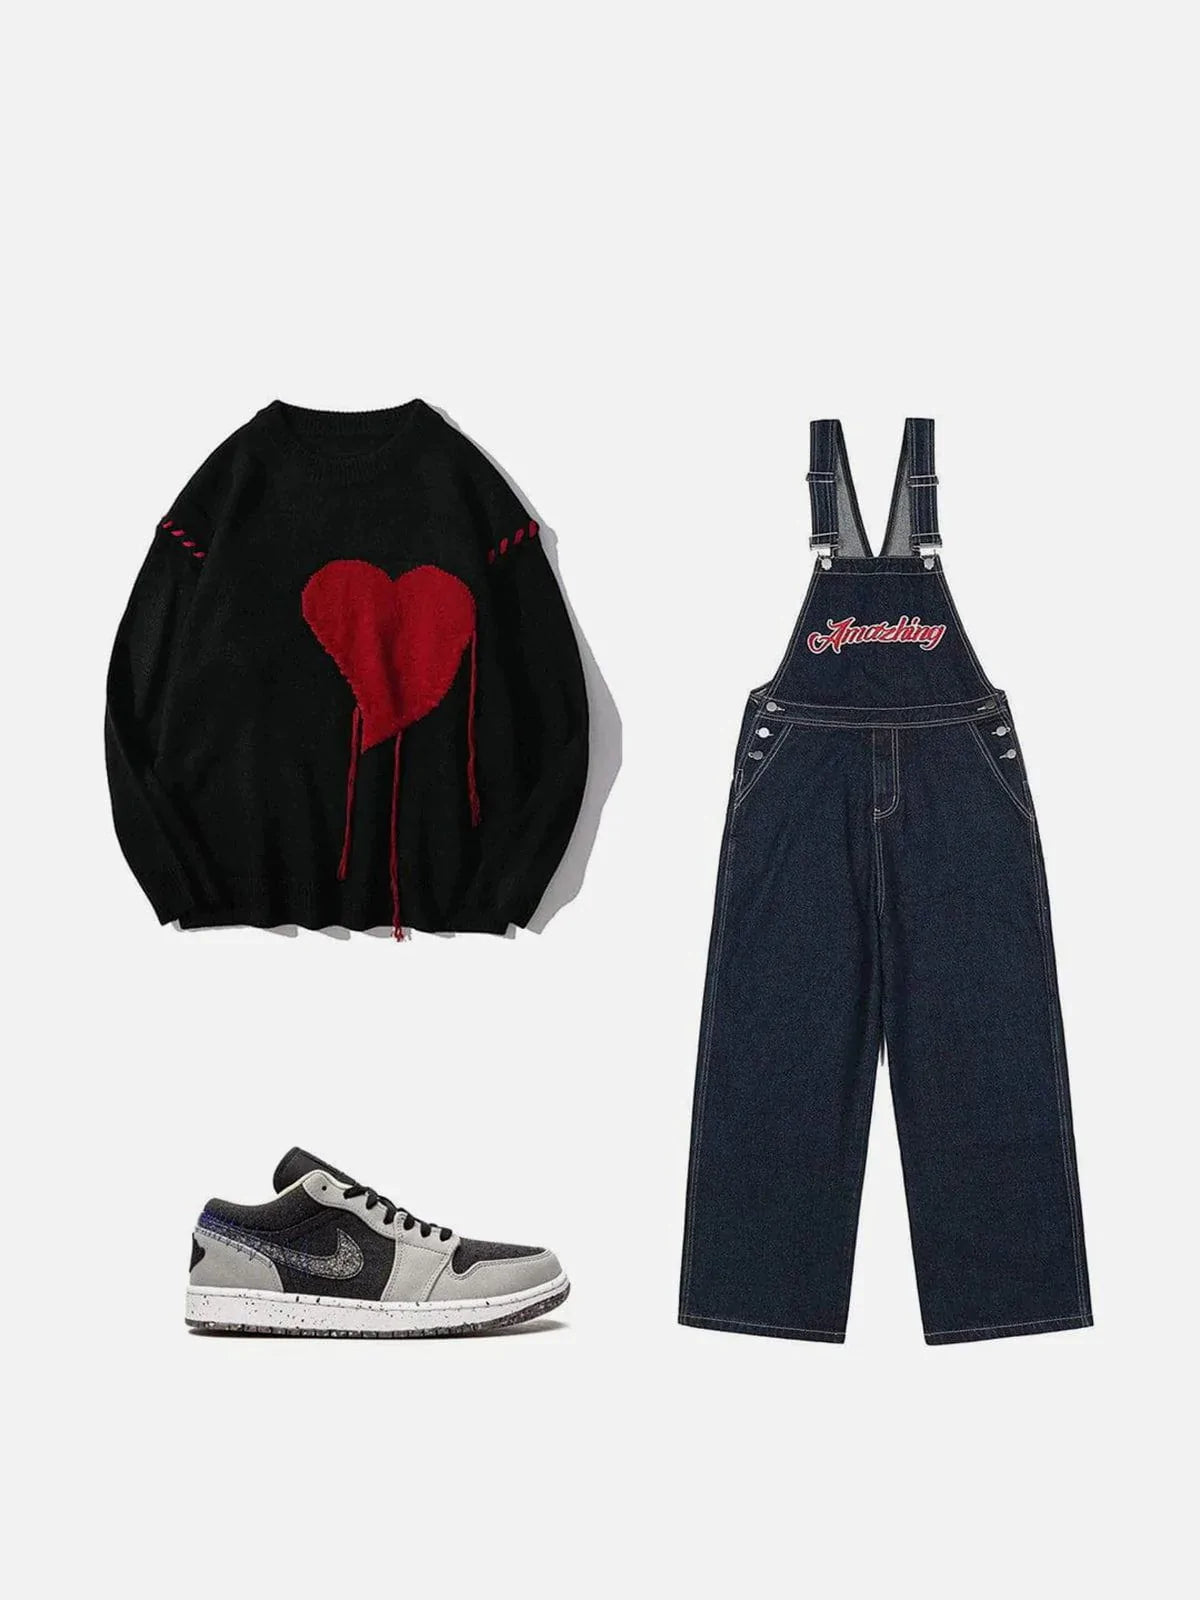 Majesda® - Love Embroidered Sweater outfit ideas streetwear fashion